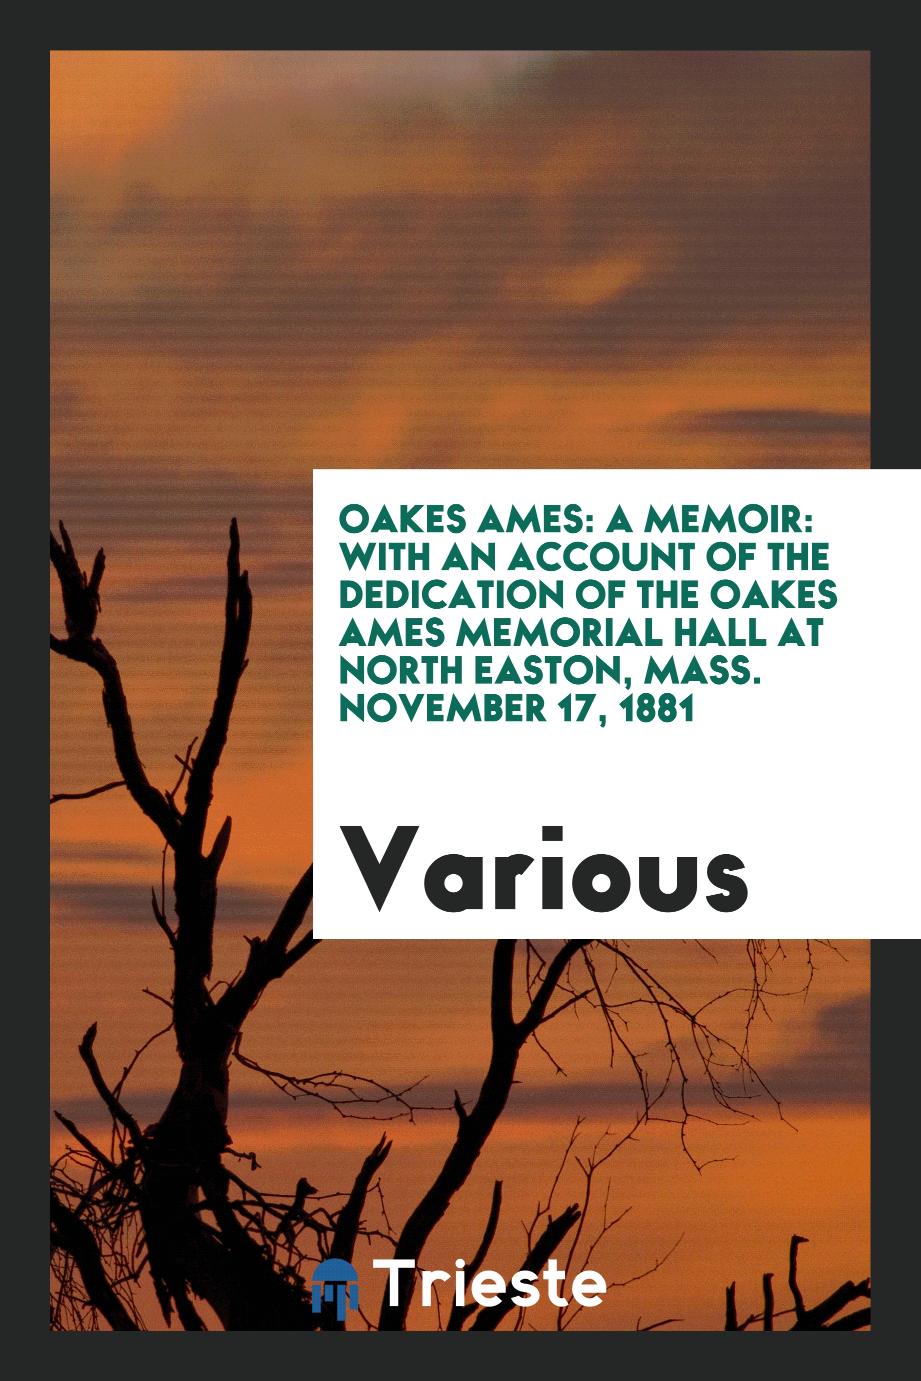 Oakes Ames: A Memoir: With an Account of the Dedication of the Oakes Ames Memorial Hall at North Easton, Mass. November 17, 1881